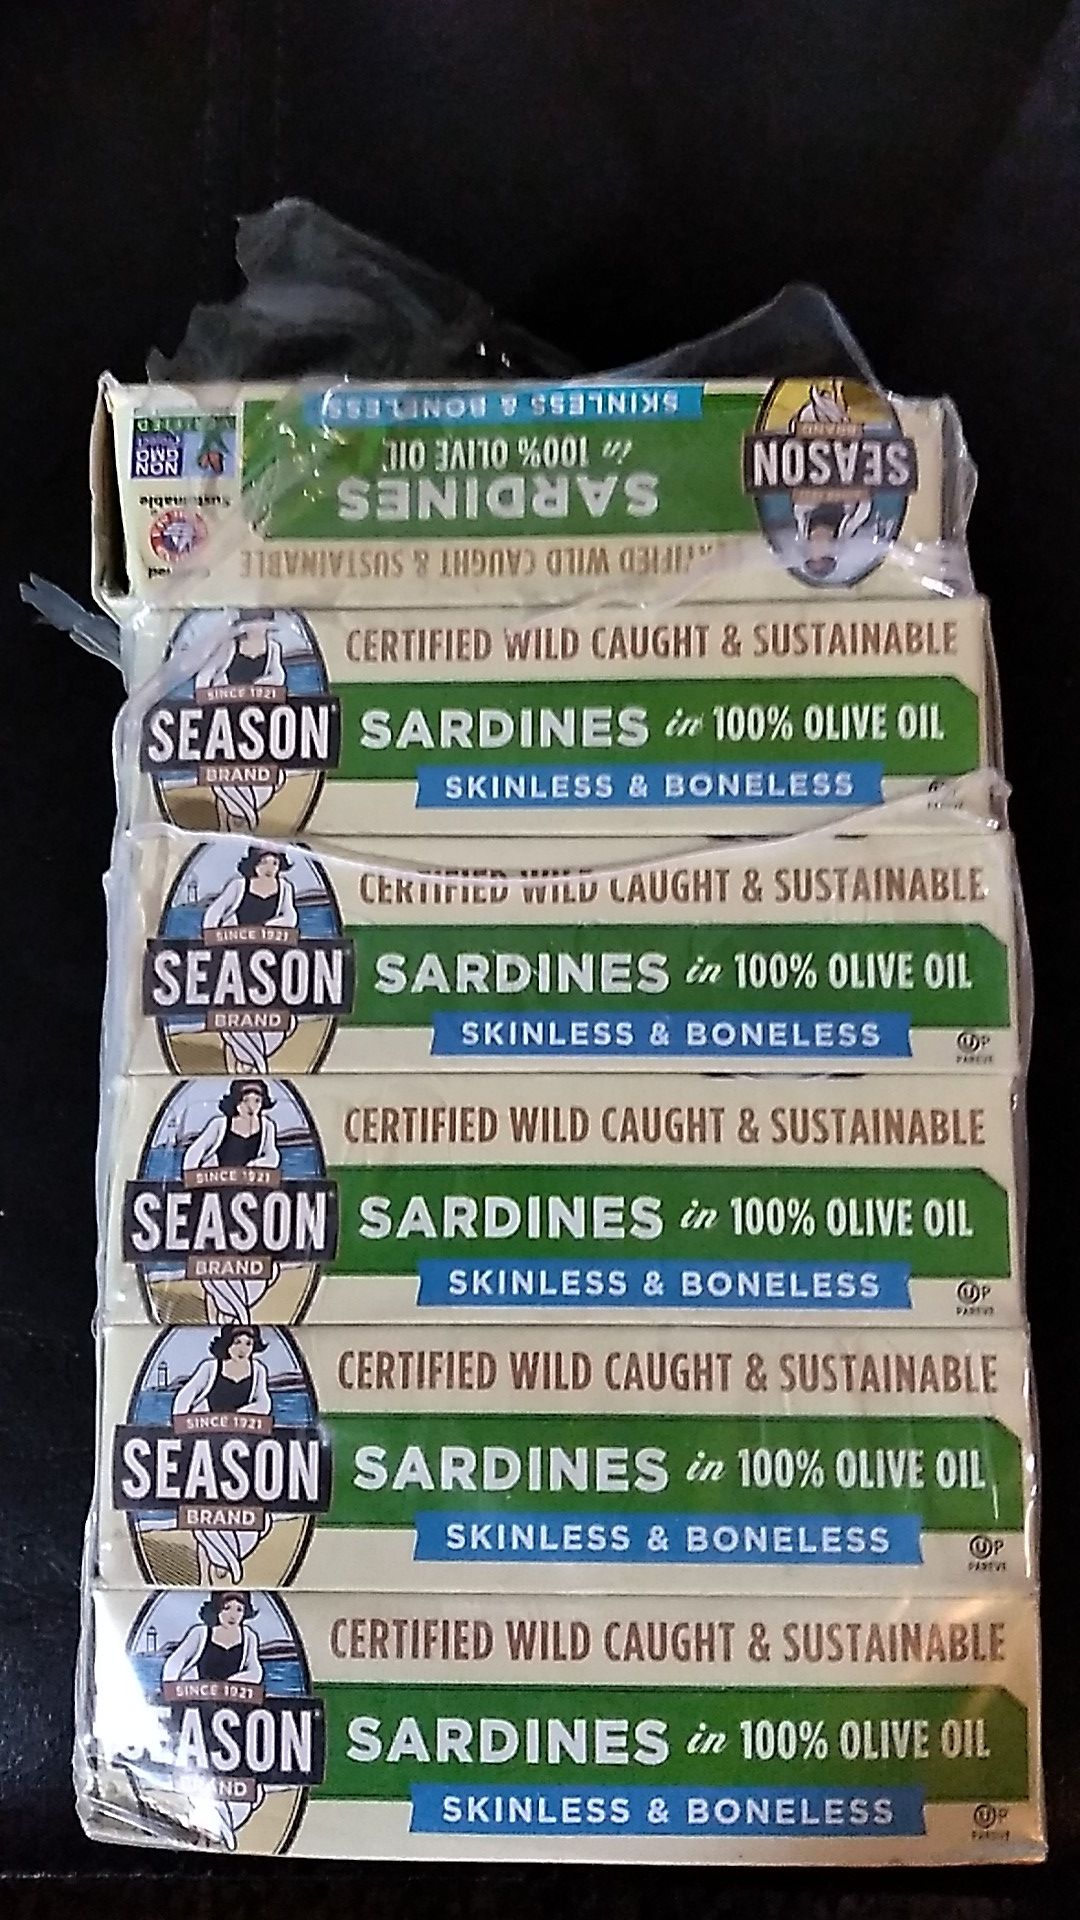 Sardines in 100% olive oil season brand 6 - 4.375 Oz cans expiration December 2025 all for $5